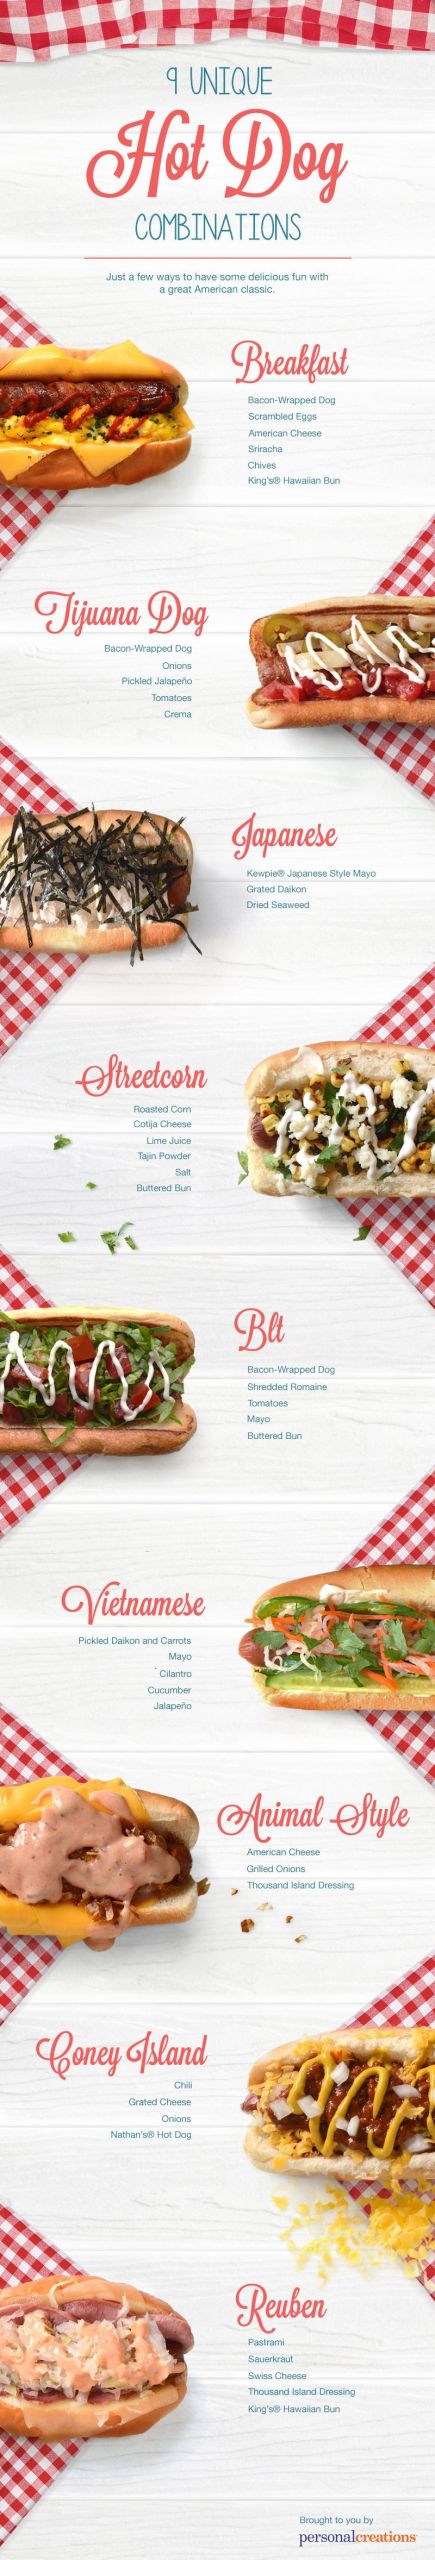 Fast Food Open On Labor Day
 9 Best Hot Dog Recipes for Labor Day [INFOGRAPHIC]